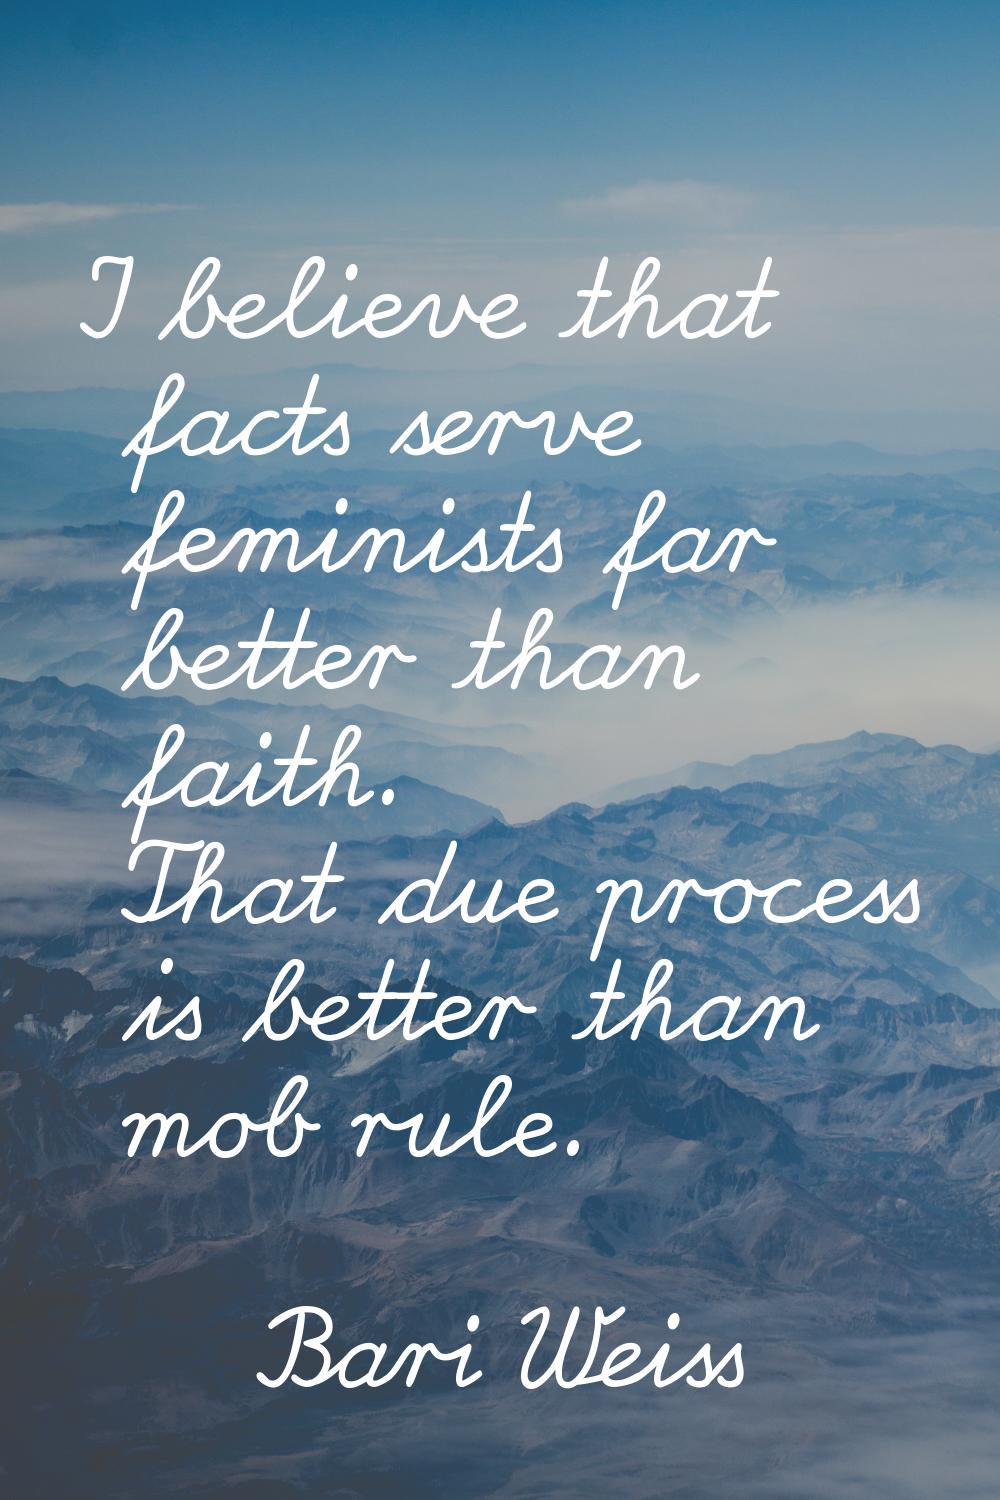 I believe that facts serve feminists far better than faith. That due process is better than mob rul